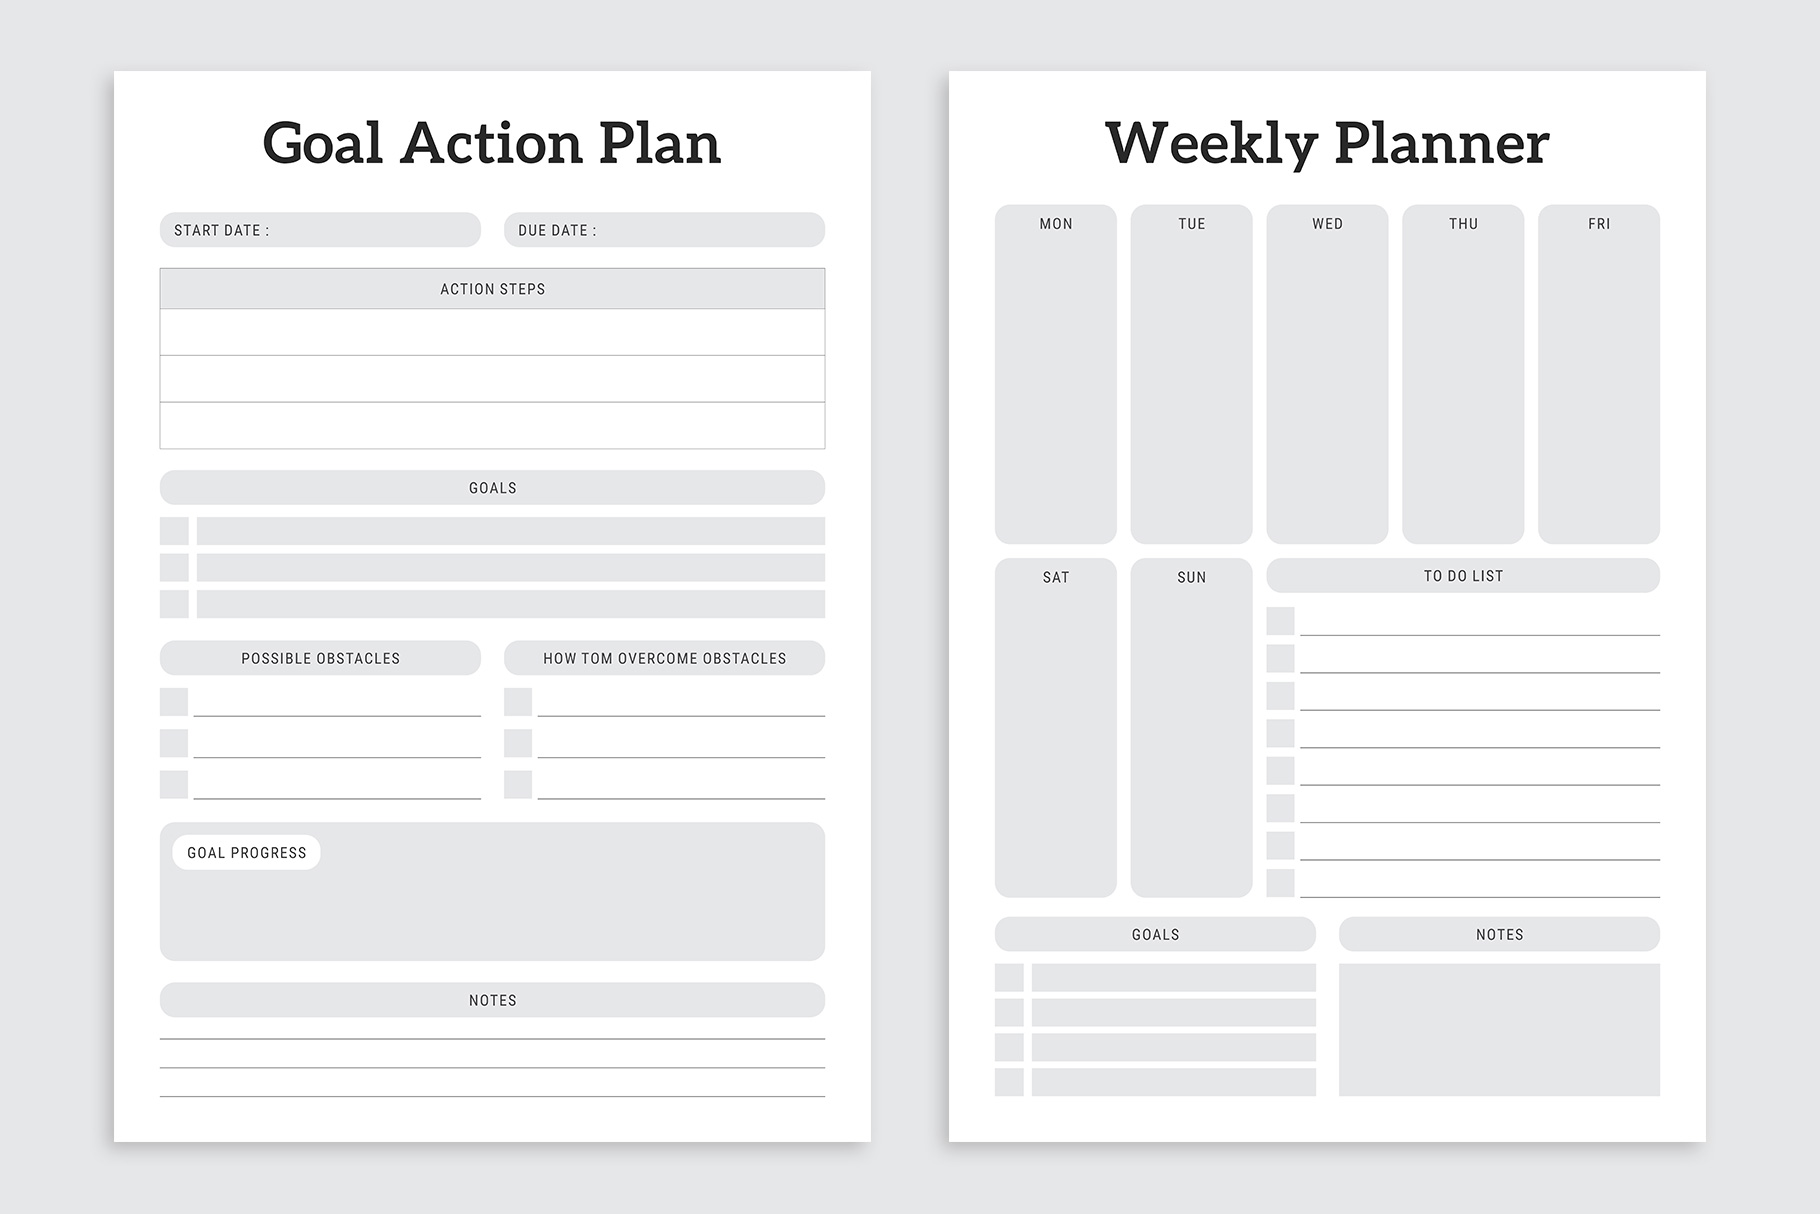 Weekly Planner & Goal Action Plan designs.